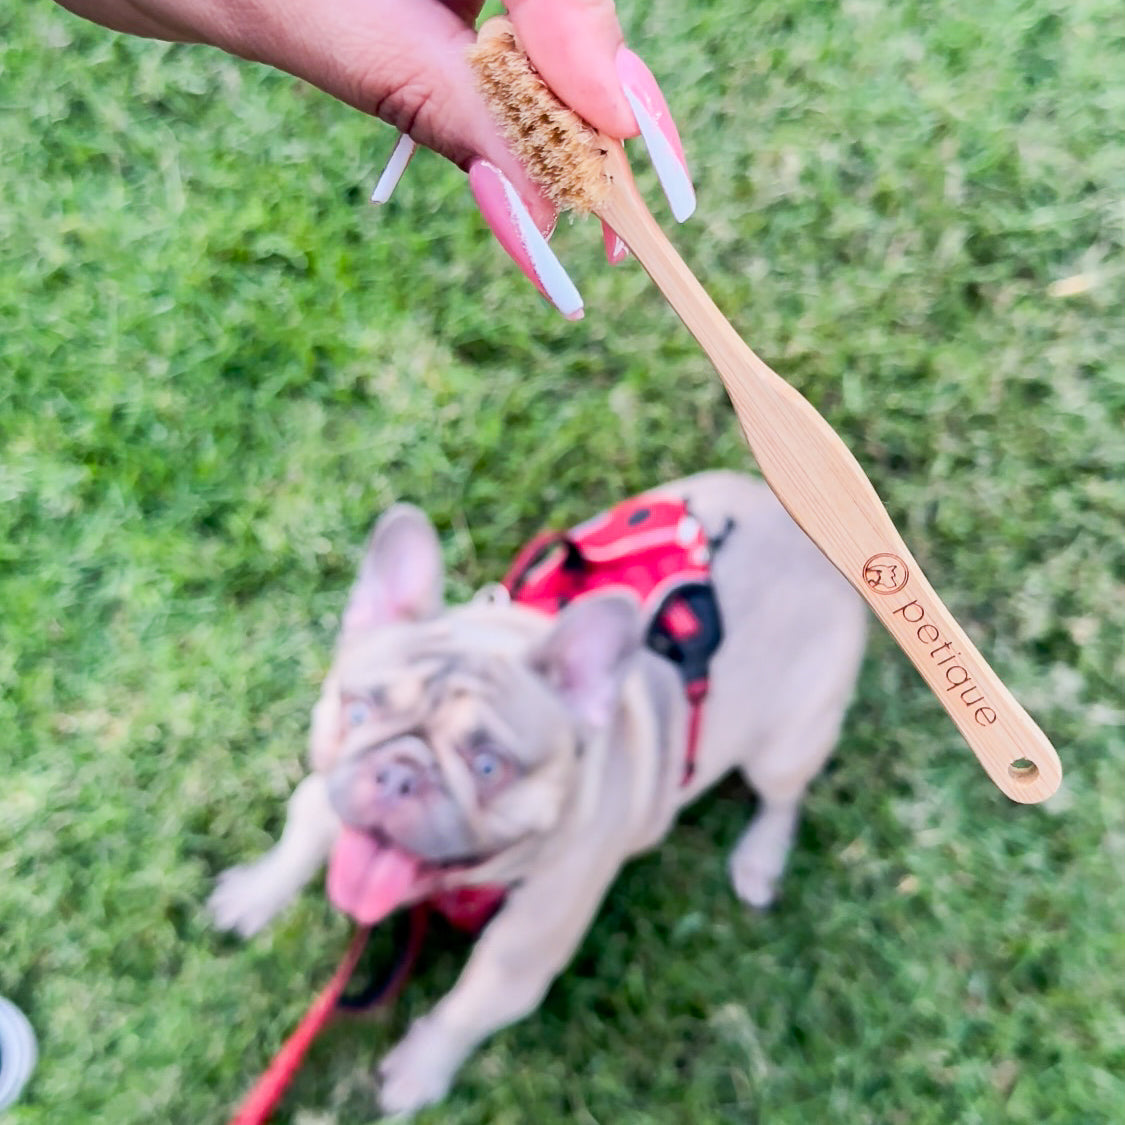 100% Sustainable Bamboo Pet Toothbrush for Dogs/Cats/Pets, Smooth Bamboo Handle, Boar's Hair Bristle, Eco-Friendly, Sustainable, Biodegradable, Non-Toxic, Compostable